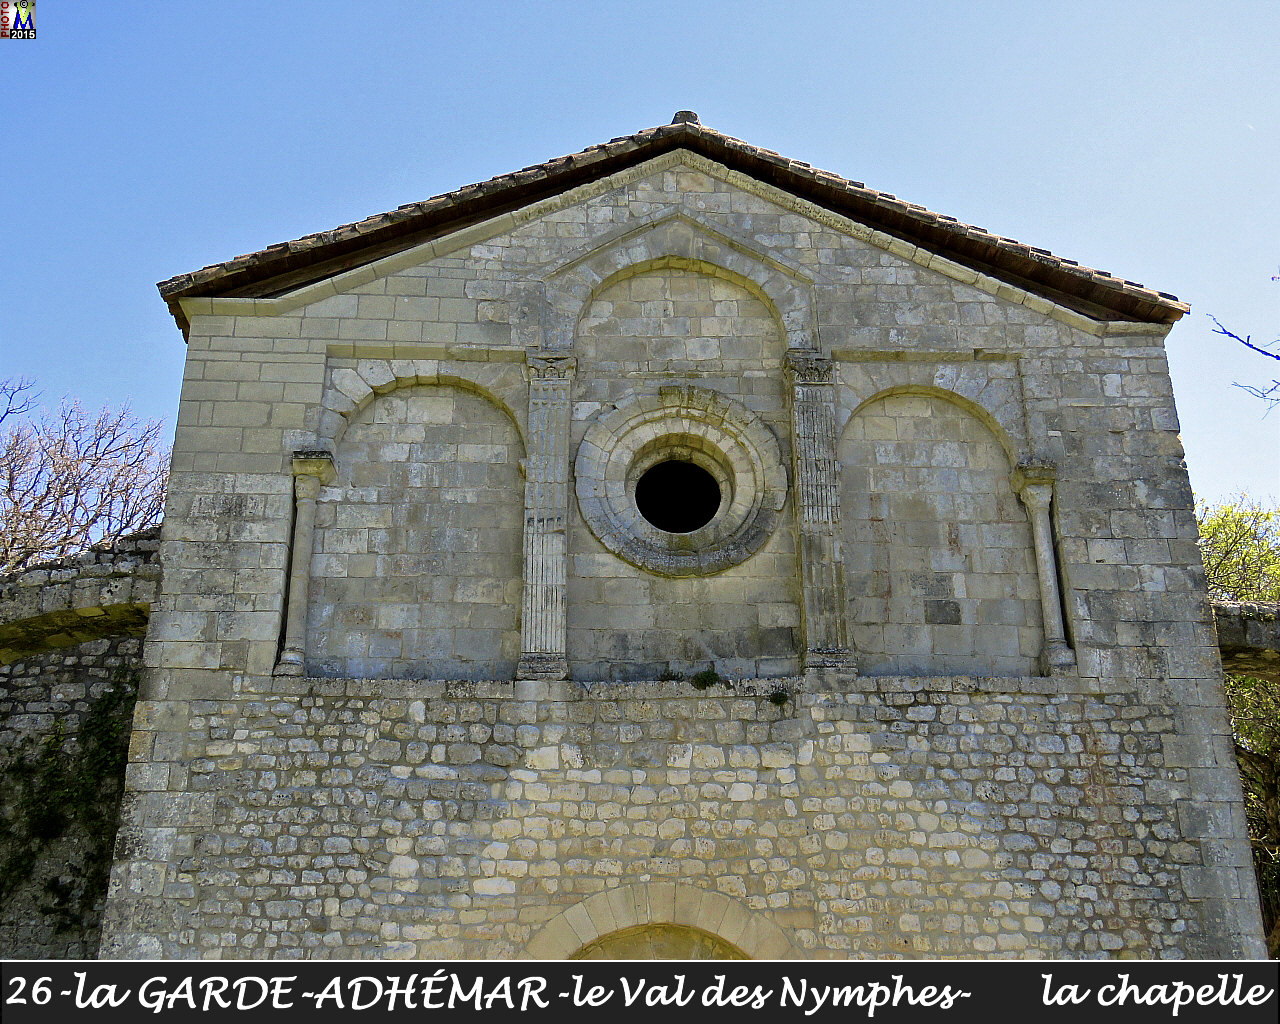 26GARDE-ADHEMARzVAL-NYMPHES_chapelle_108.jpg